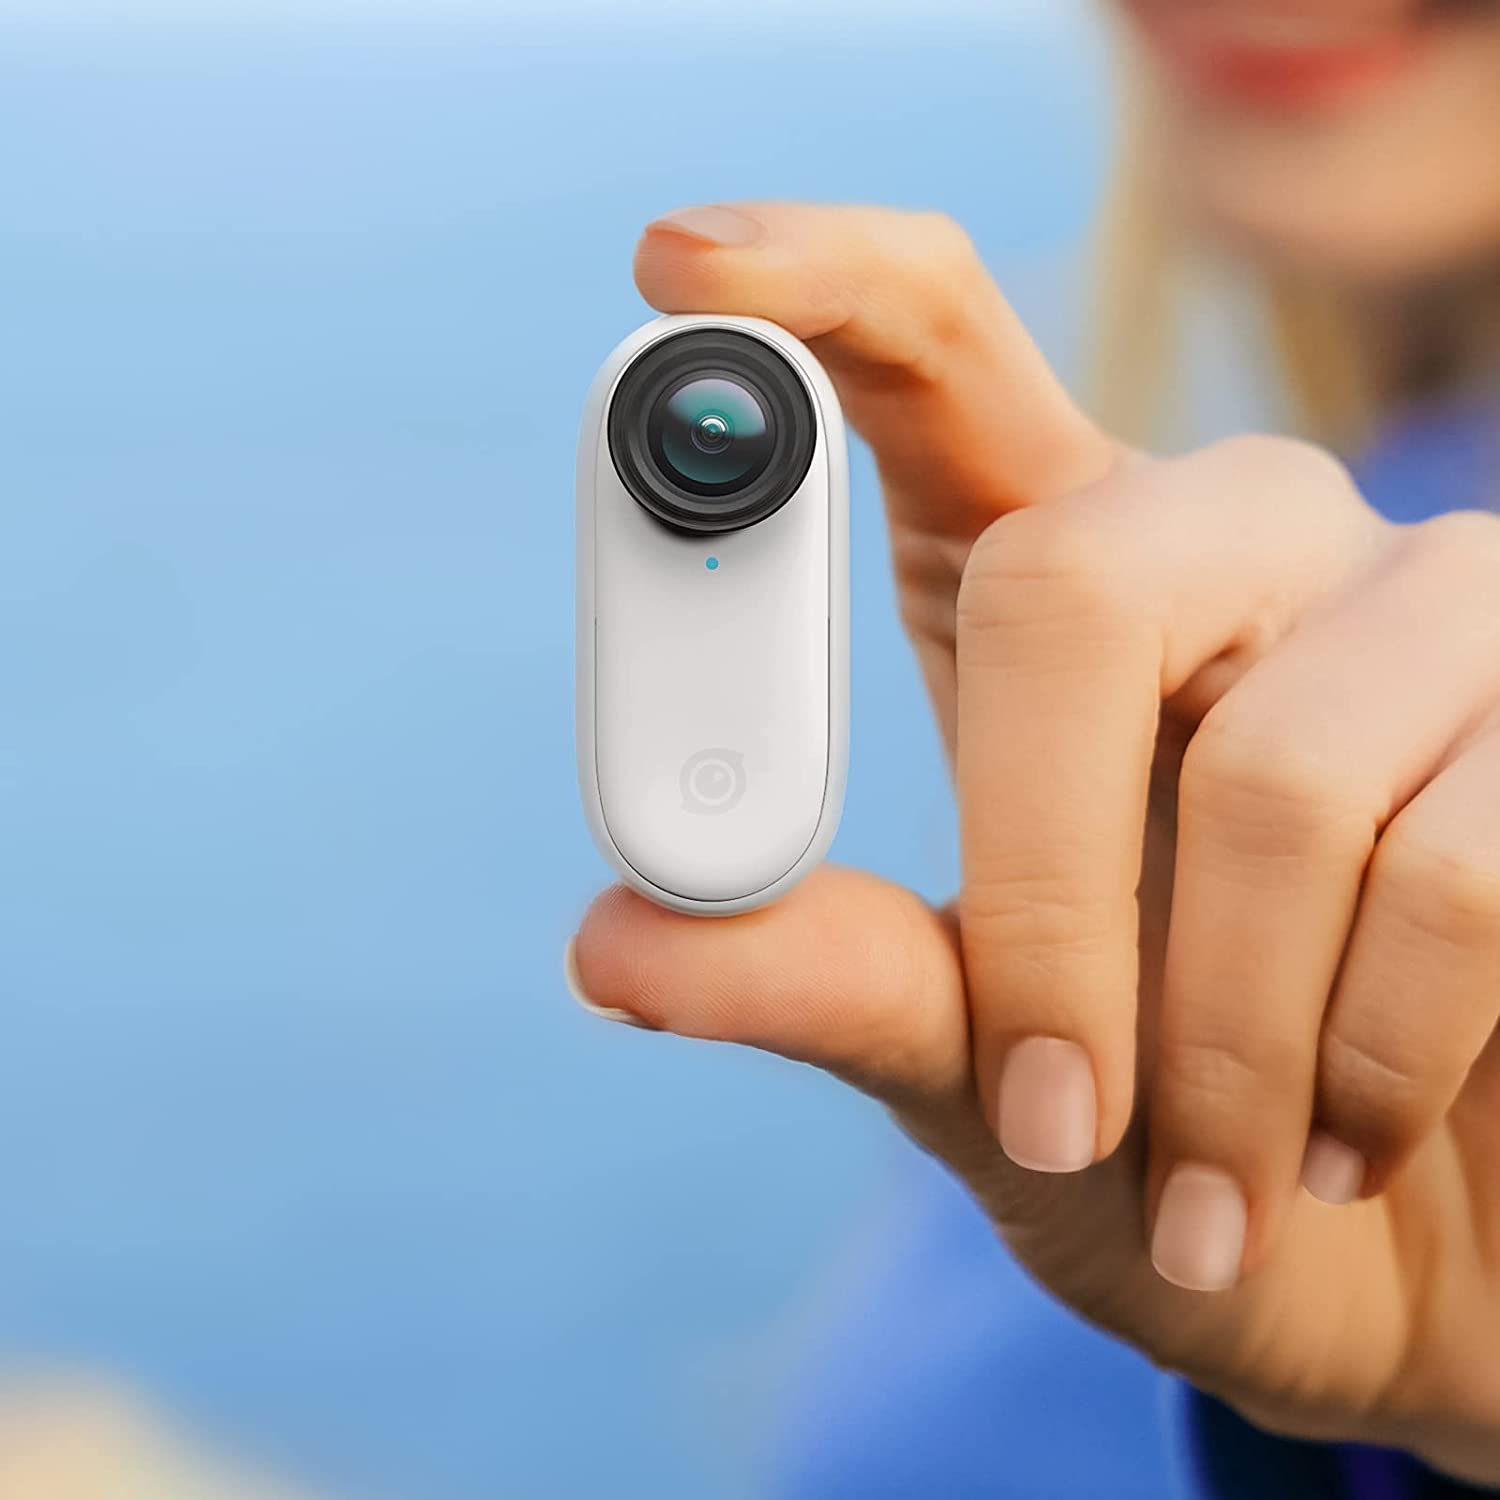 Insta360 Go 2: A Thumb-Sized Action Camera with High-Quality Video